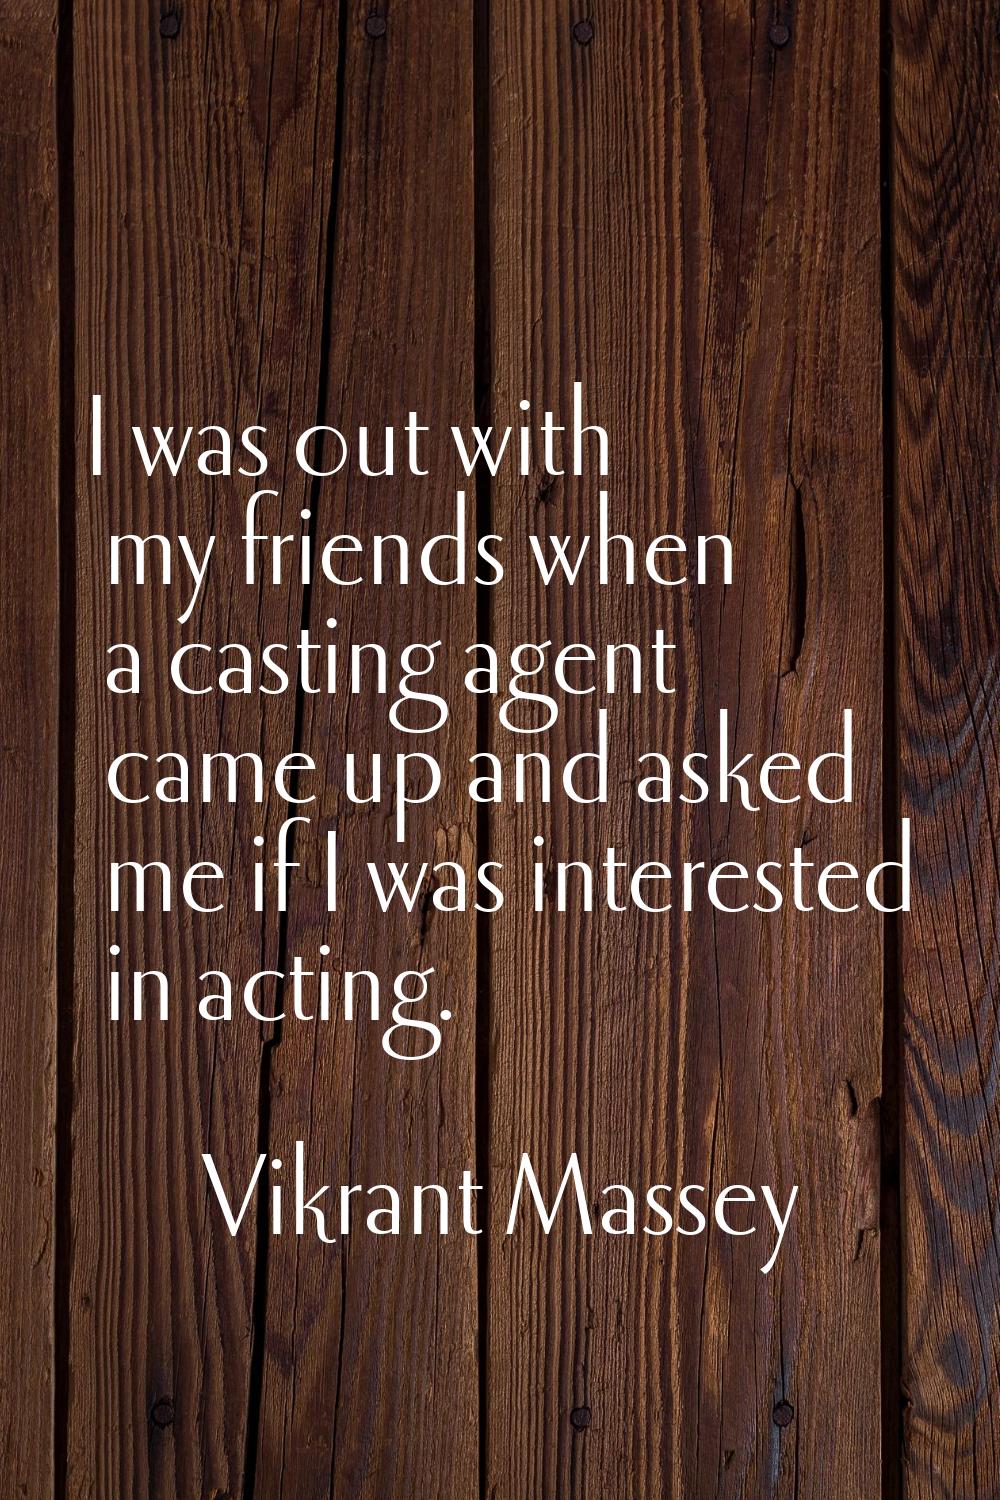 I was out with my friends when a casting agent came up and asked me if I was interested in acting.